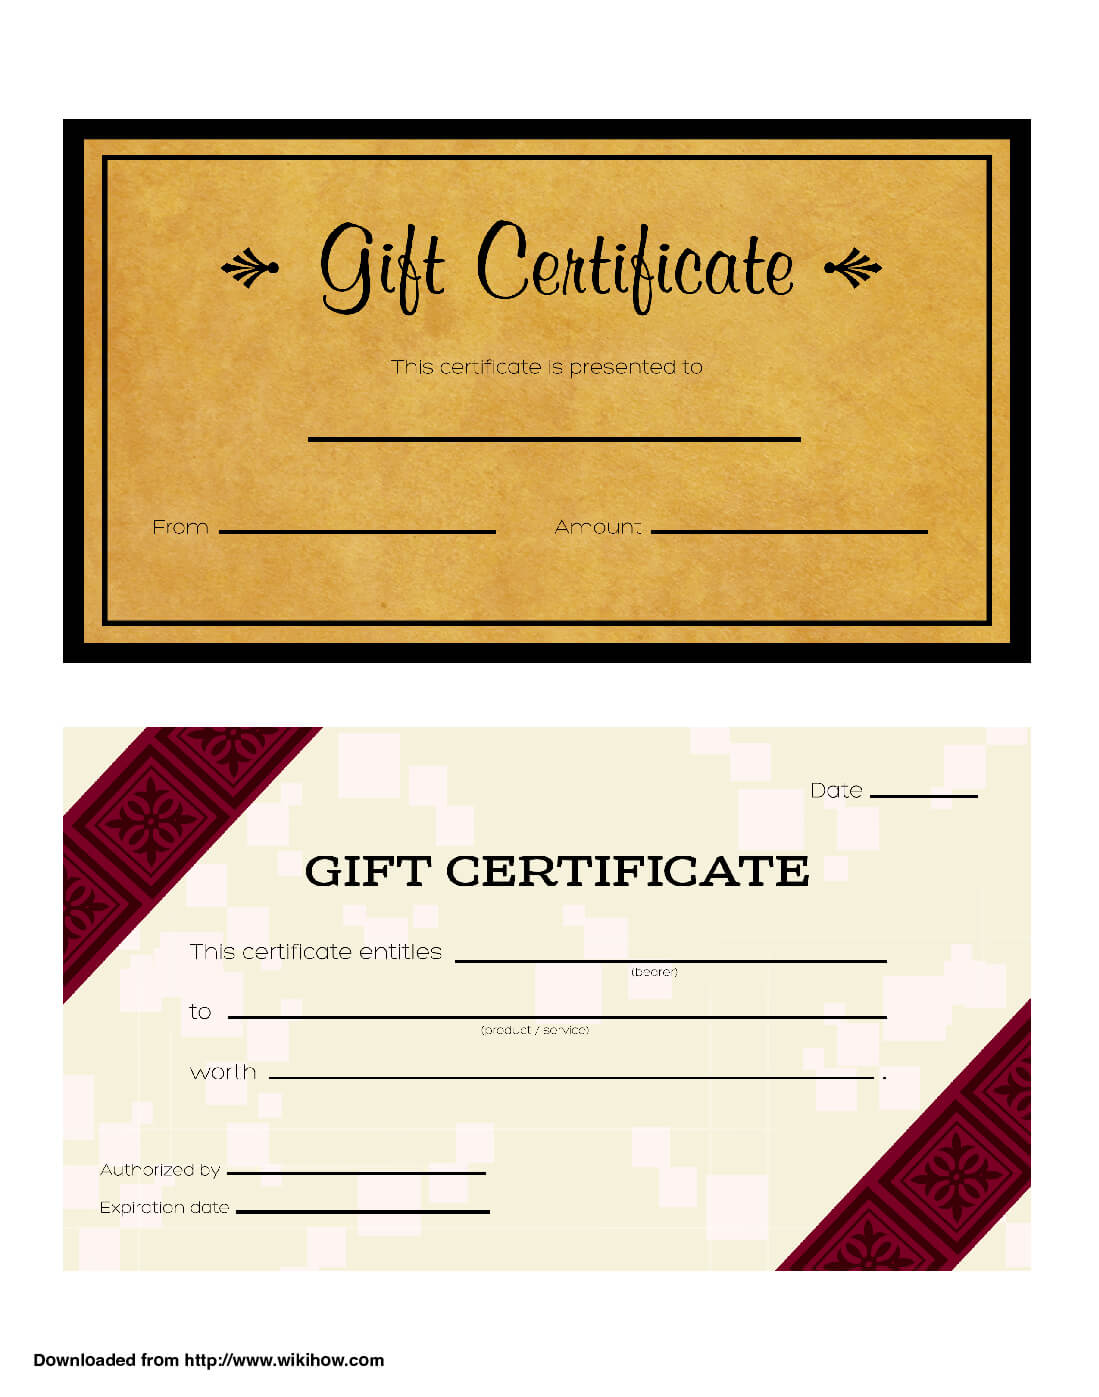 3 Ways To Make Your Own Printable Certificate – Wikihow For Automotive Gift Certificate Template